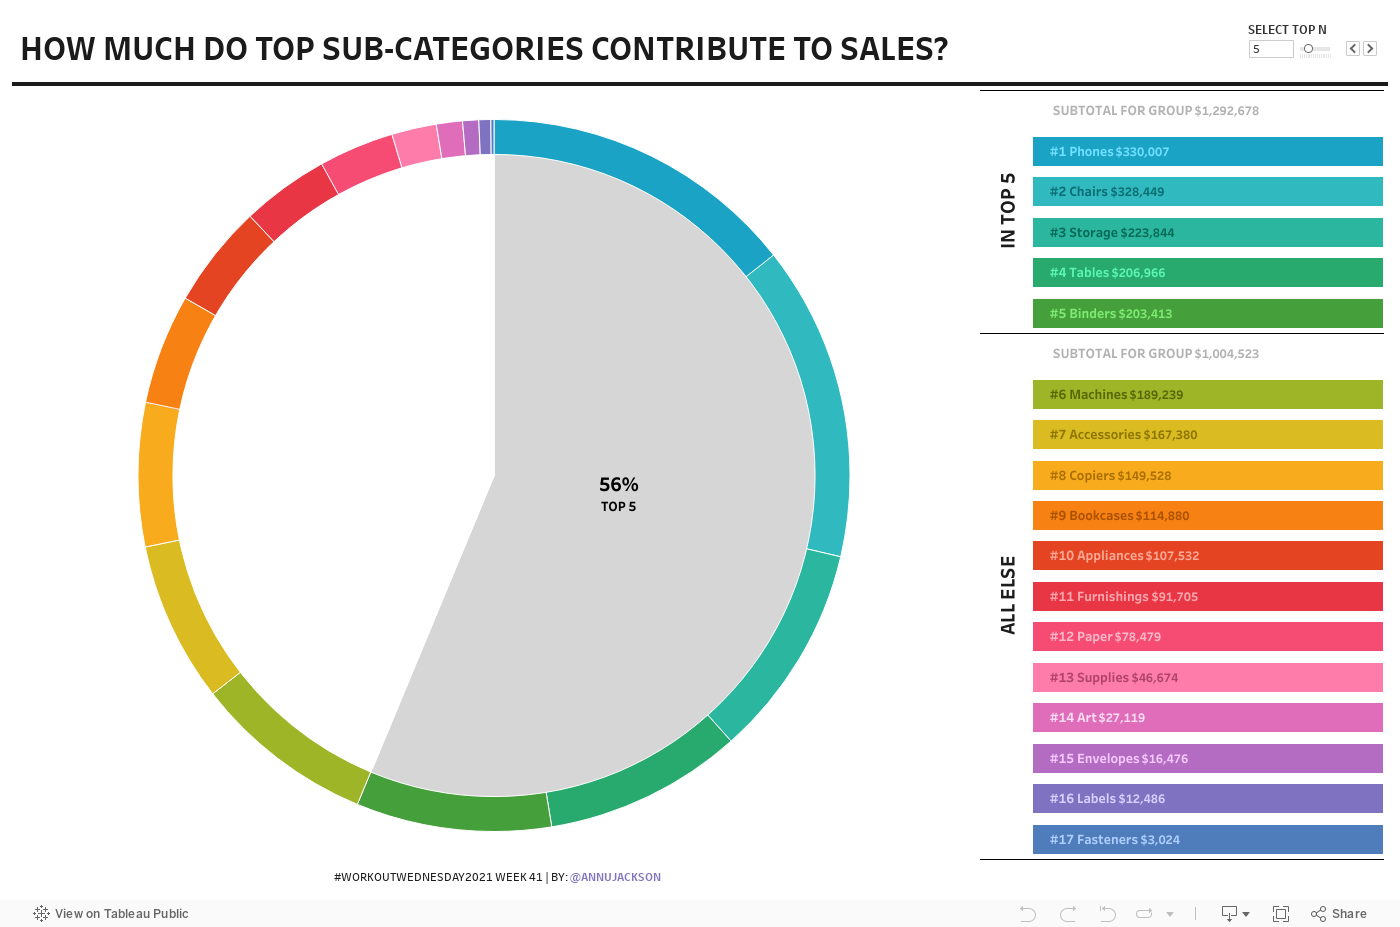 #WorkoutWednesday 2021 | How Much Do Top Sub-Categories Contribute to Sales 